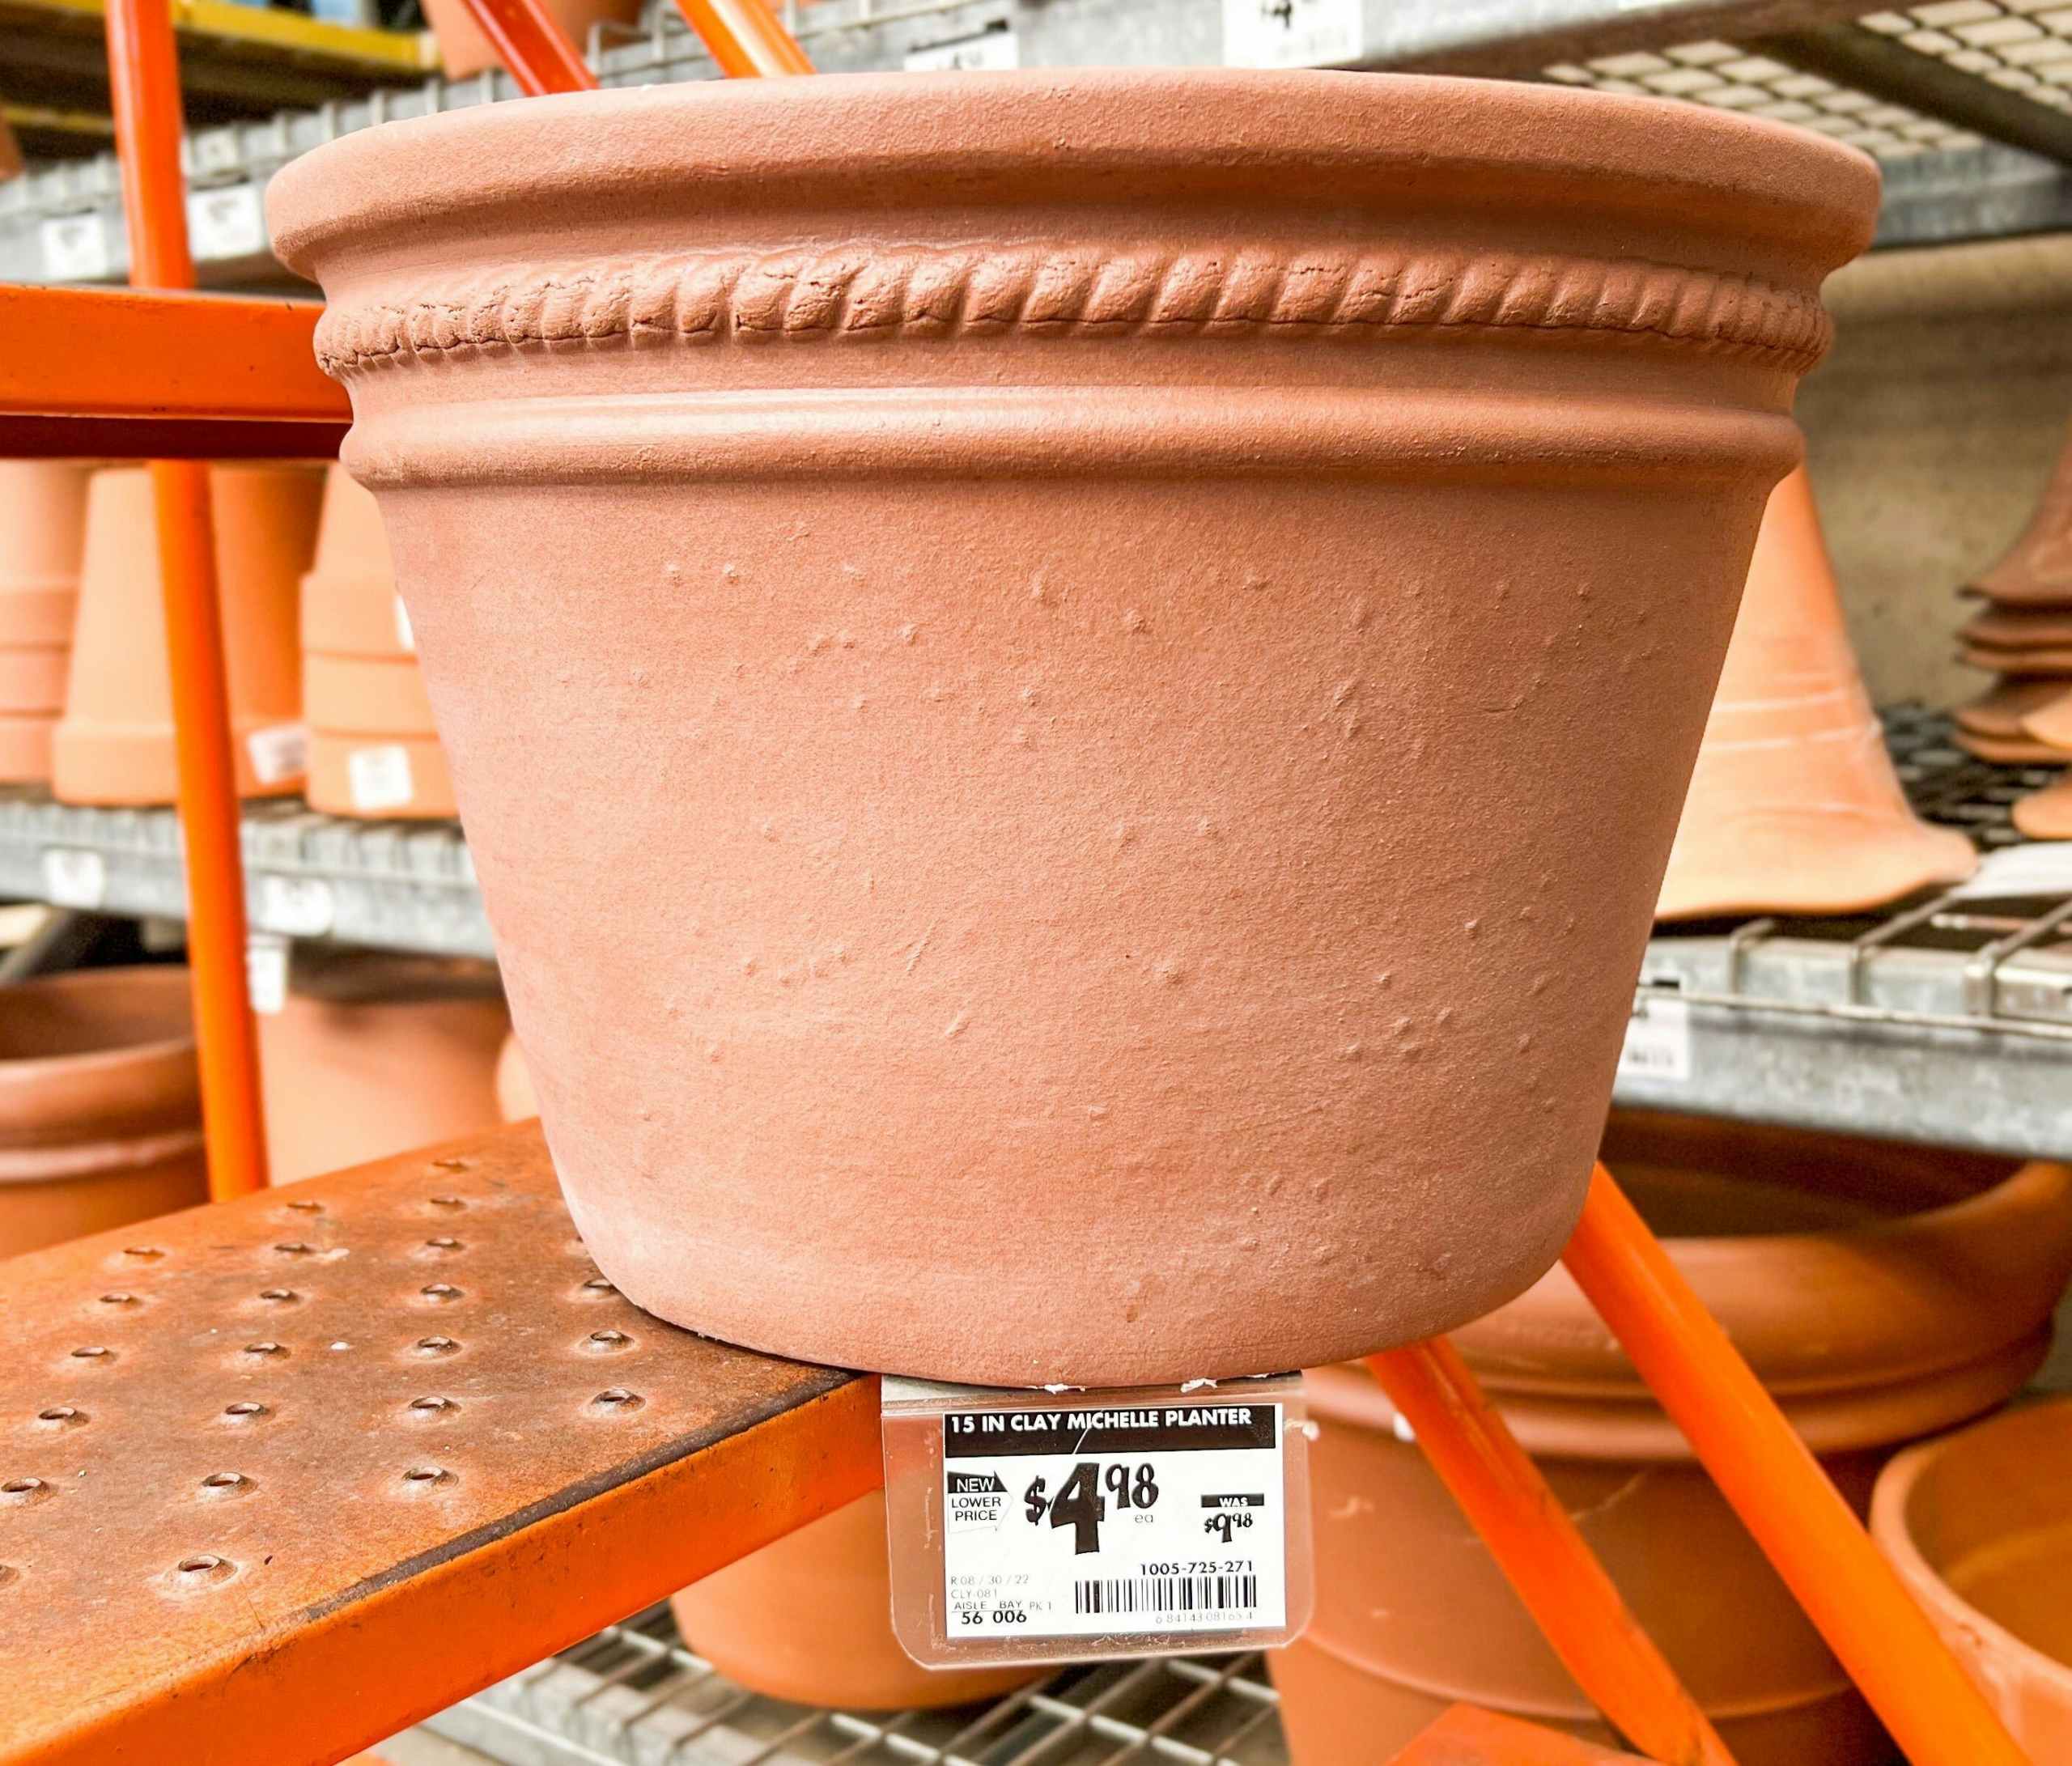 terra cotta planter on stairs with sale price tag